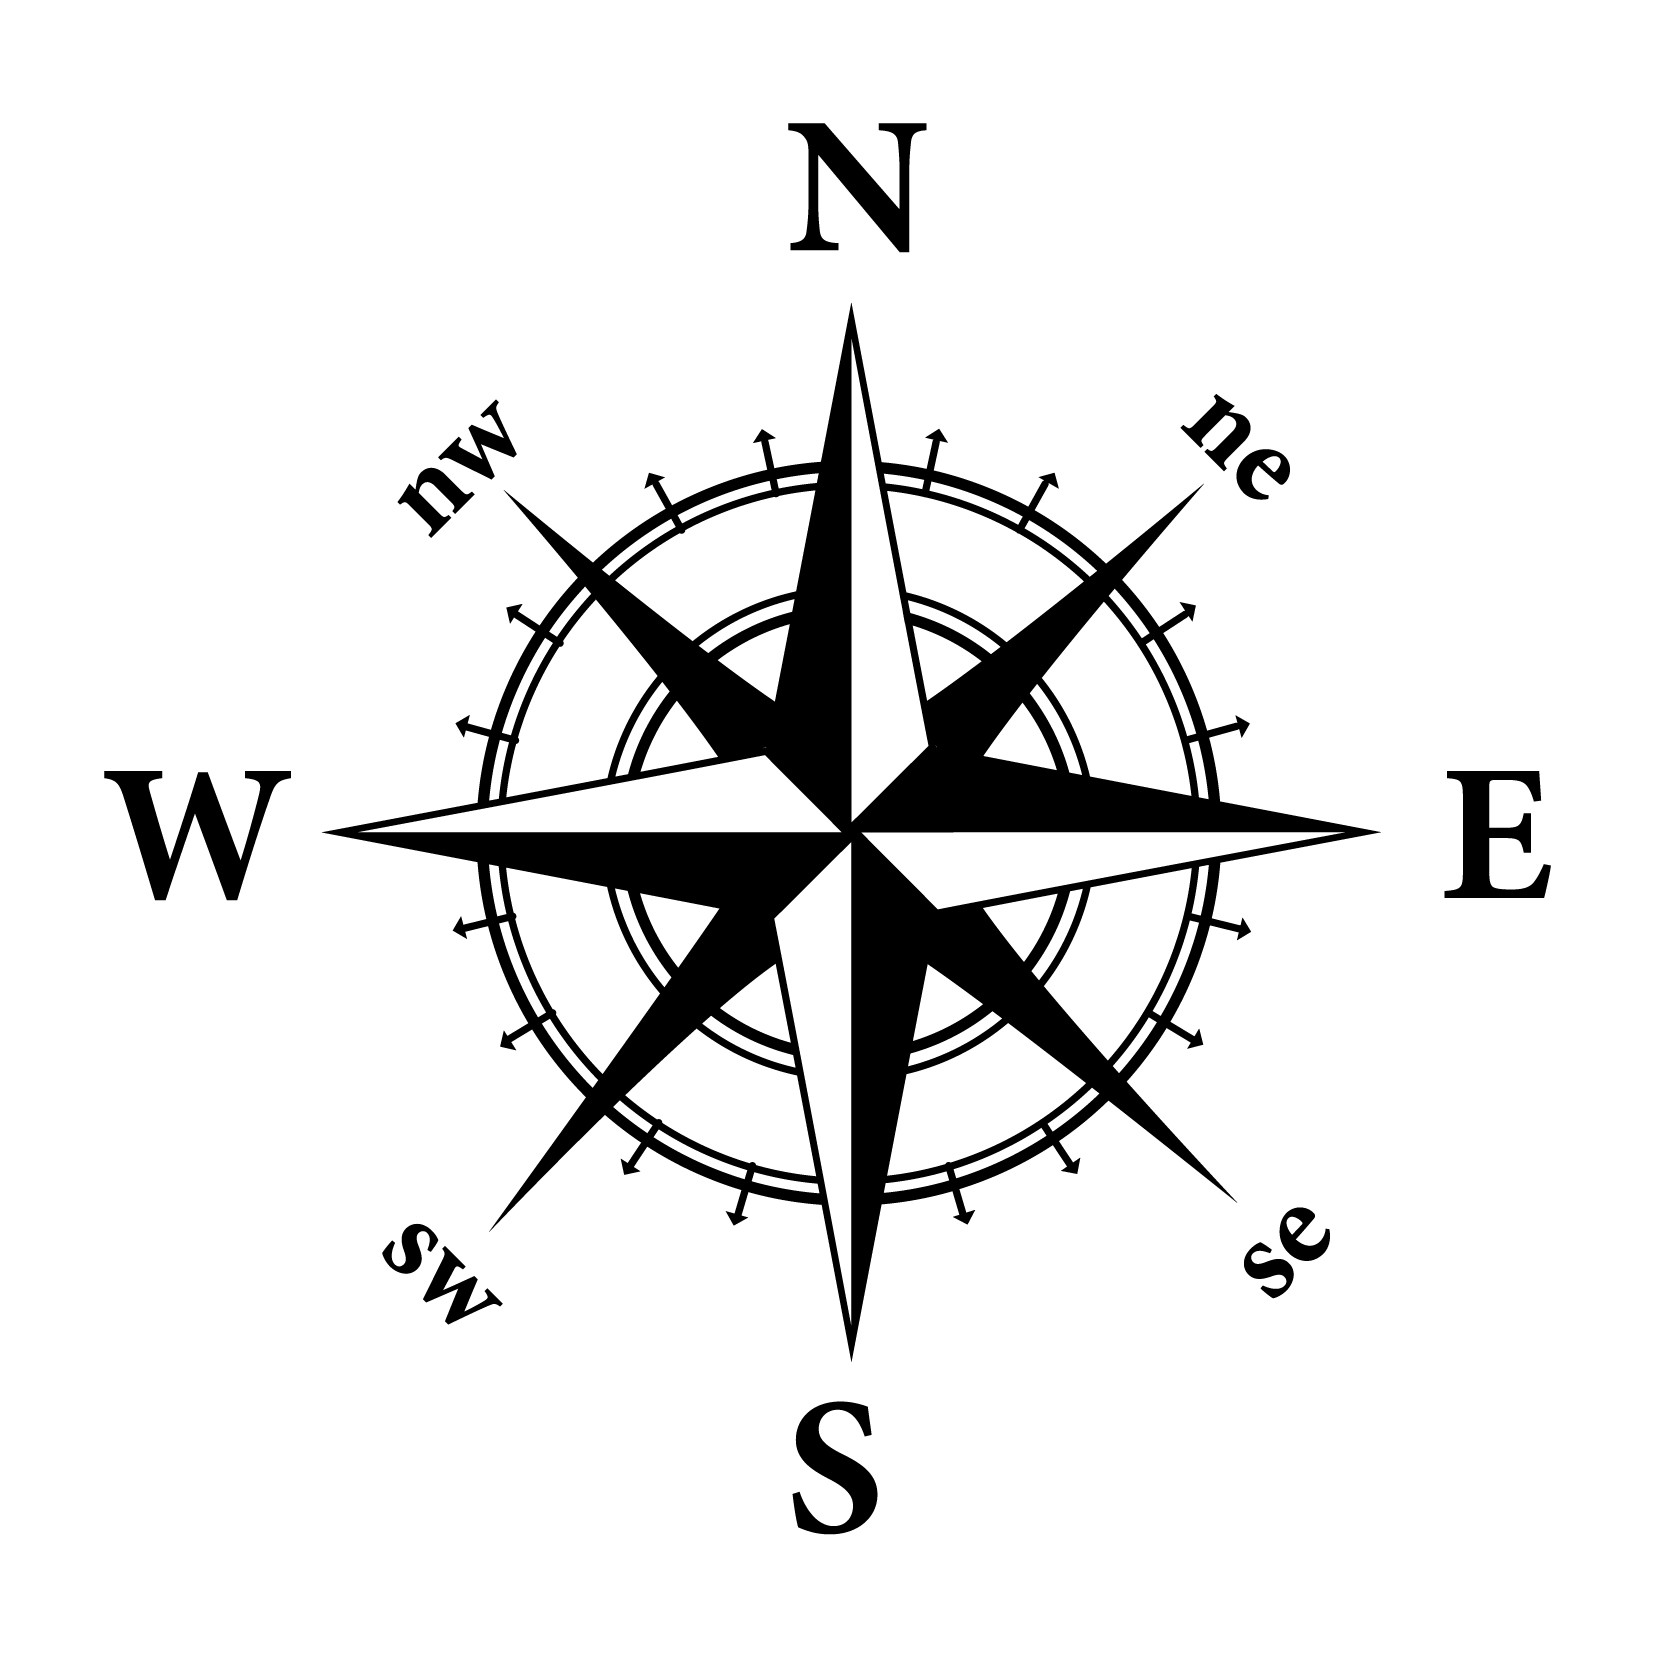 Compass clipart 2 image